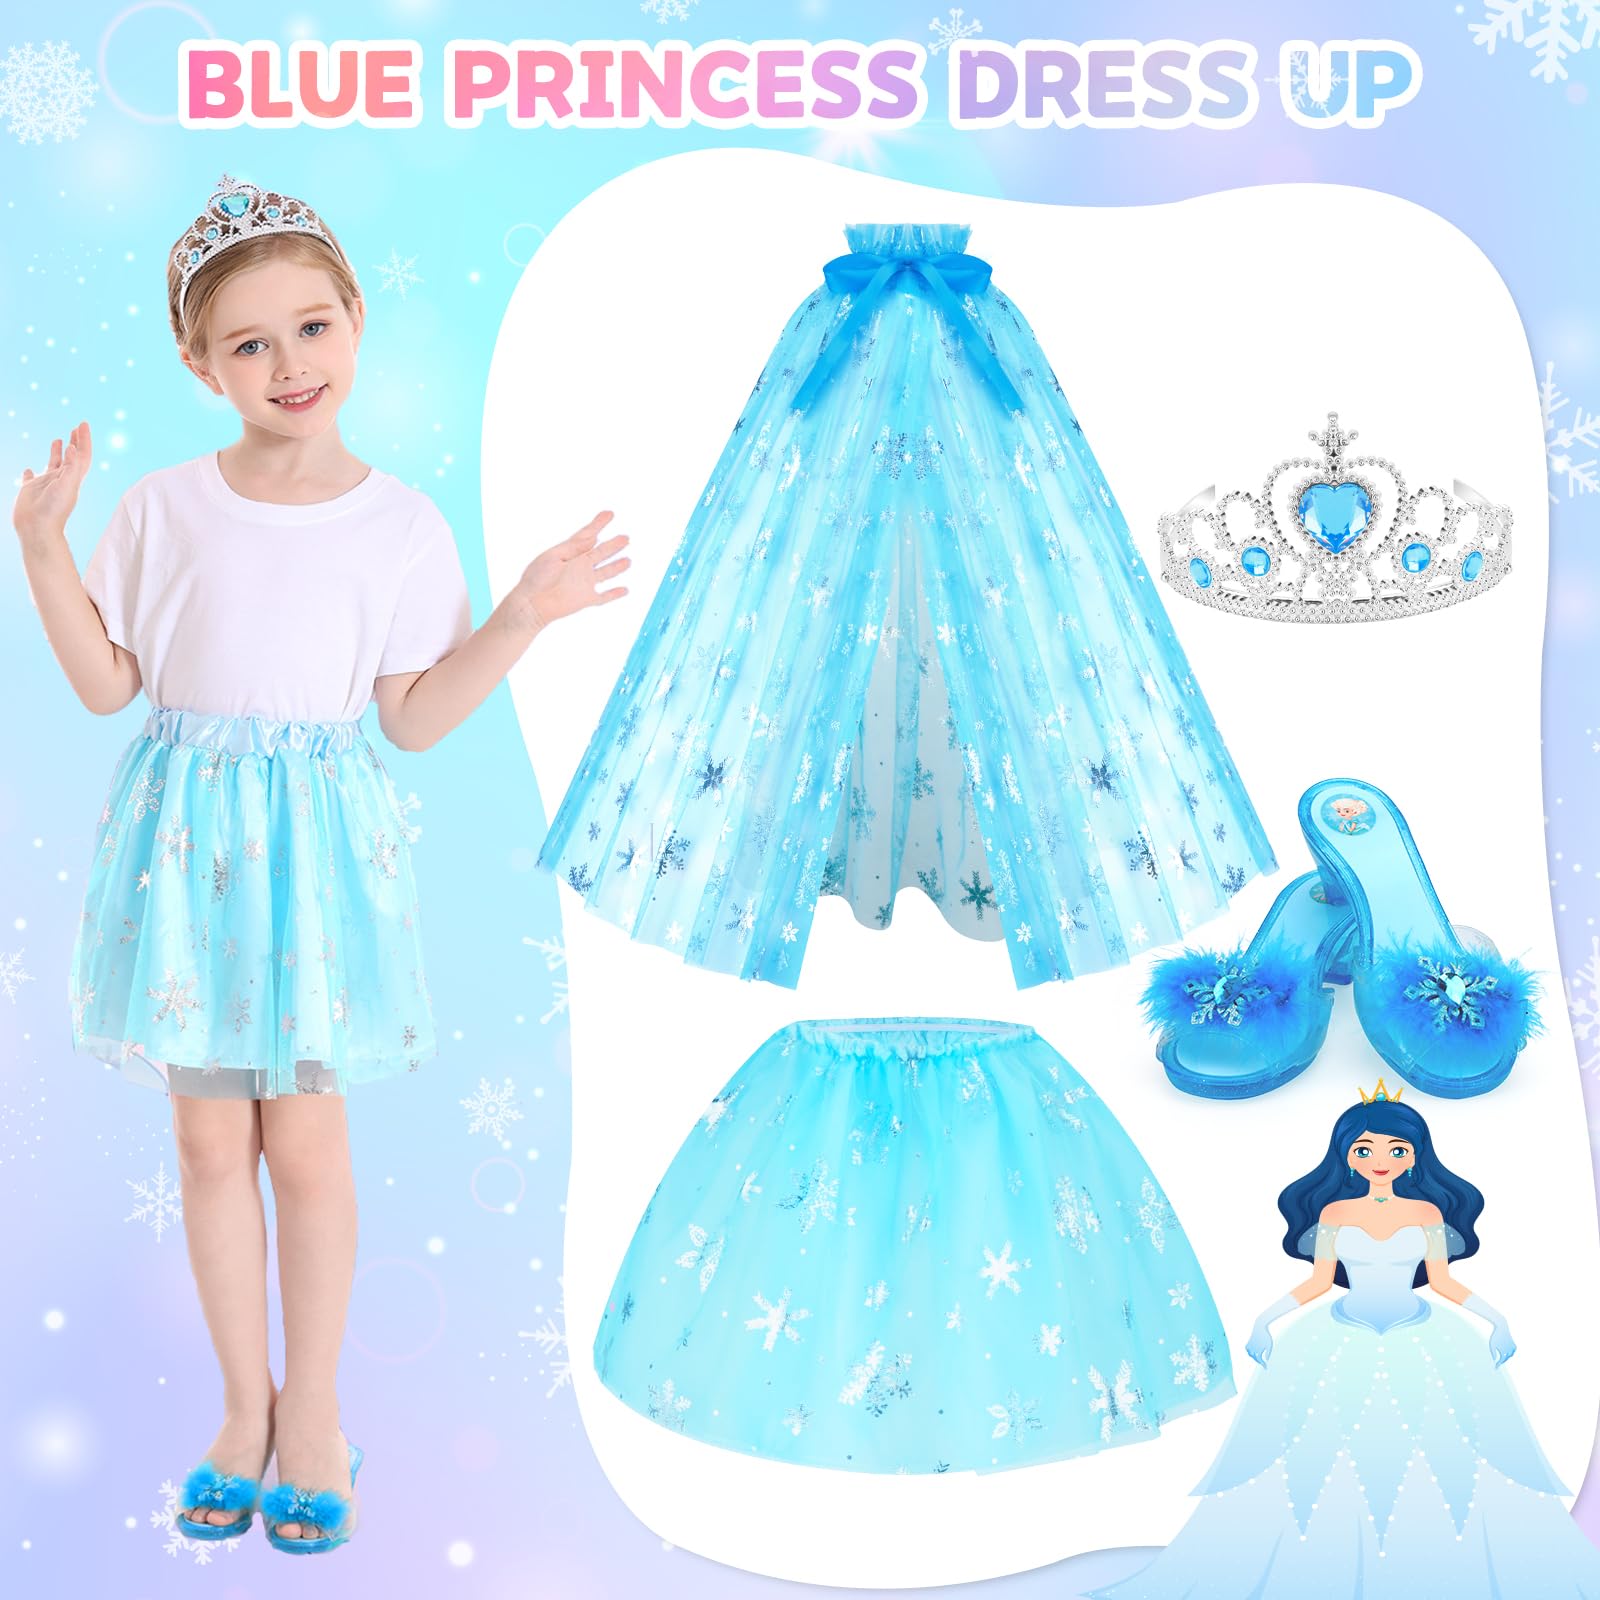 Princess Dress Up Shoes Set,Kids' Dress Up & Pretend Play Toy for Girls, Dresses,Tops,Jewelry, Shoes,Unicorn Mermaid Ice Princess Toys Gifts for Little Girls 3-6 Years Toddler Birthday Party